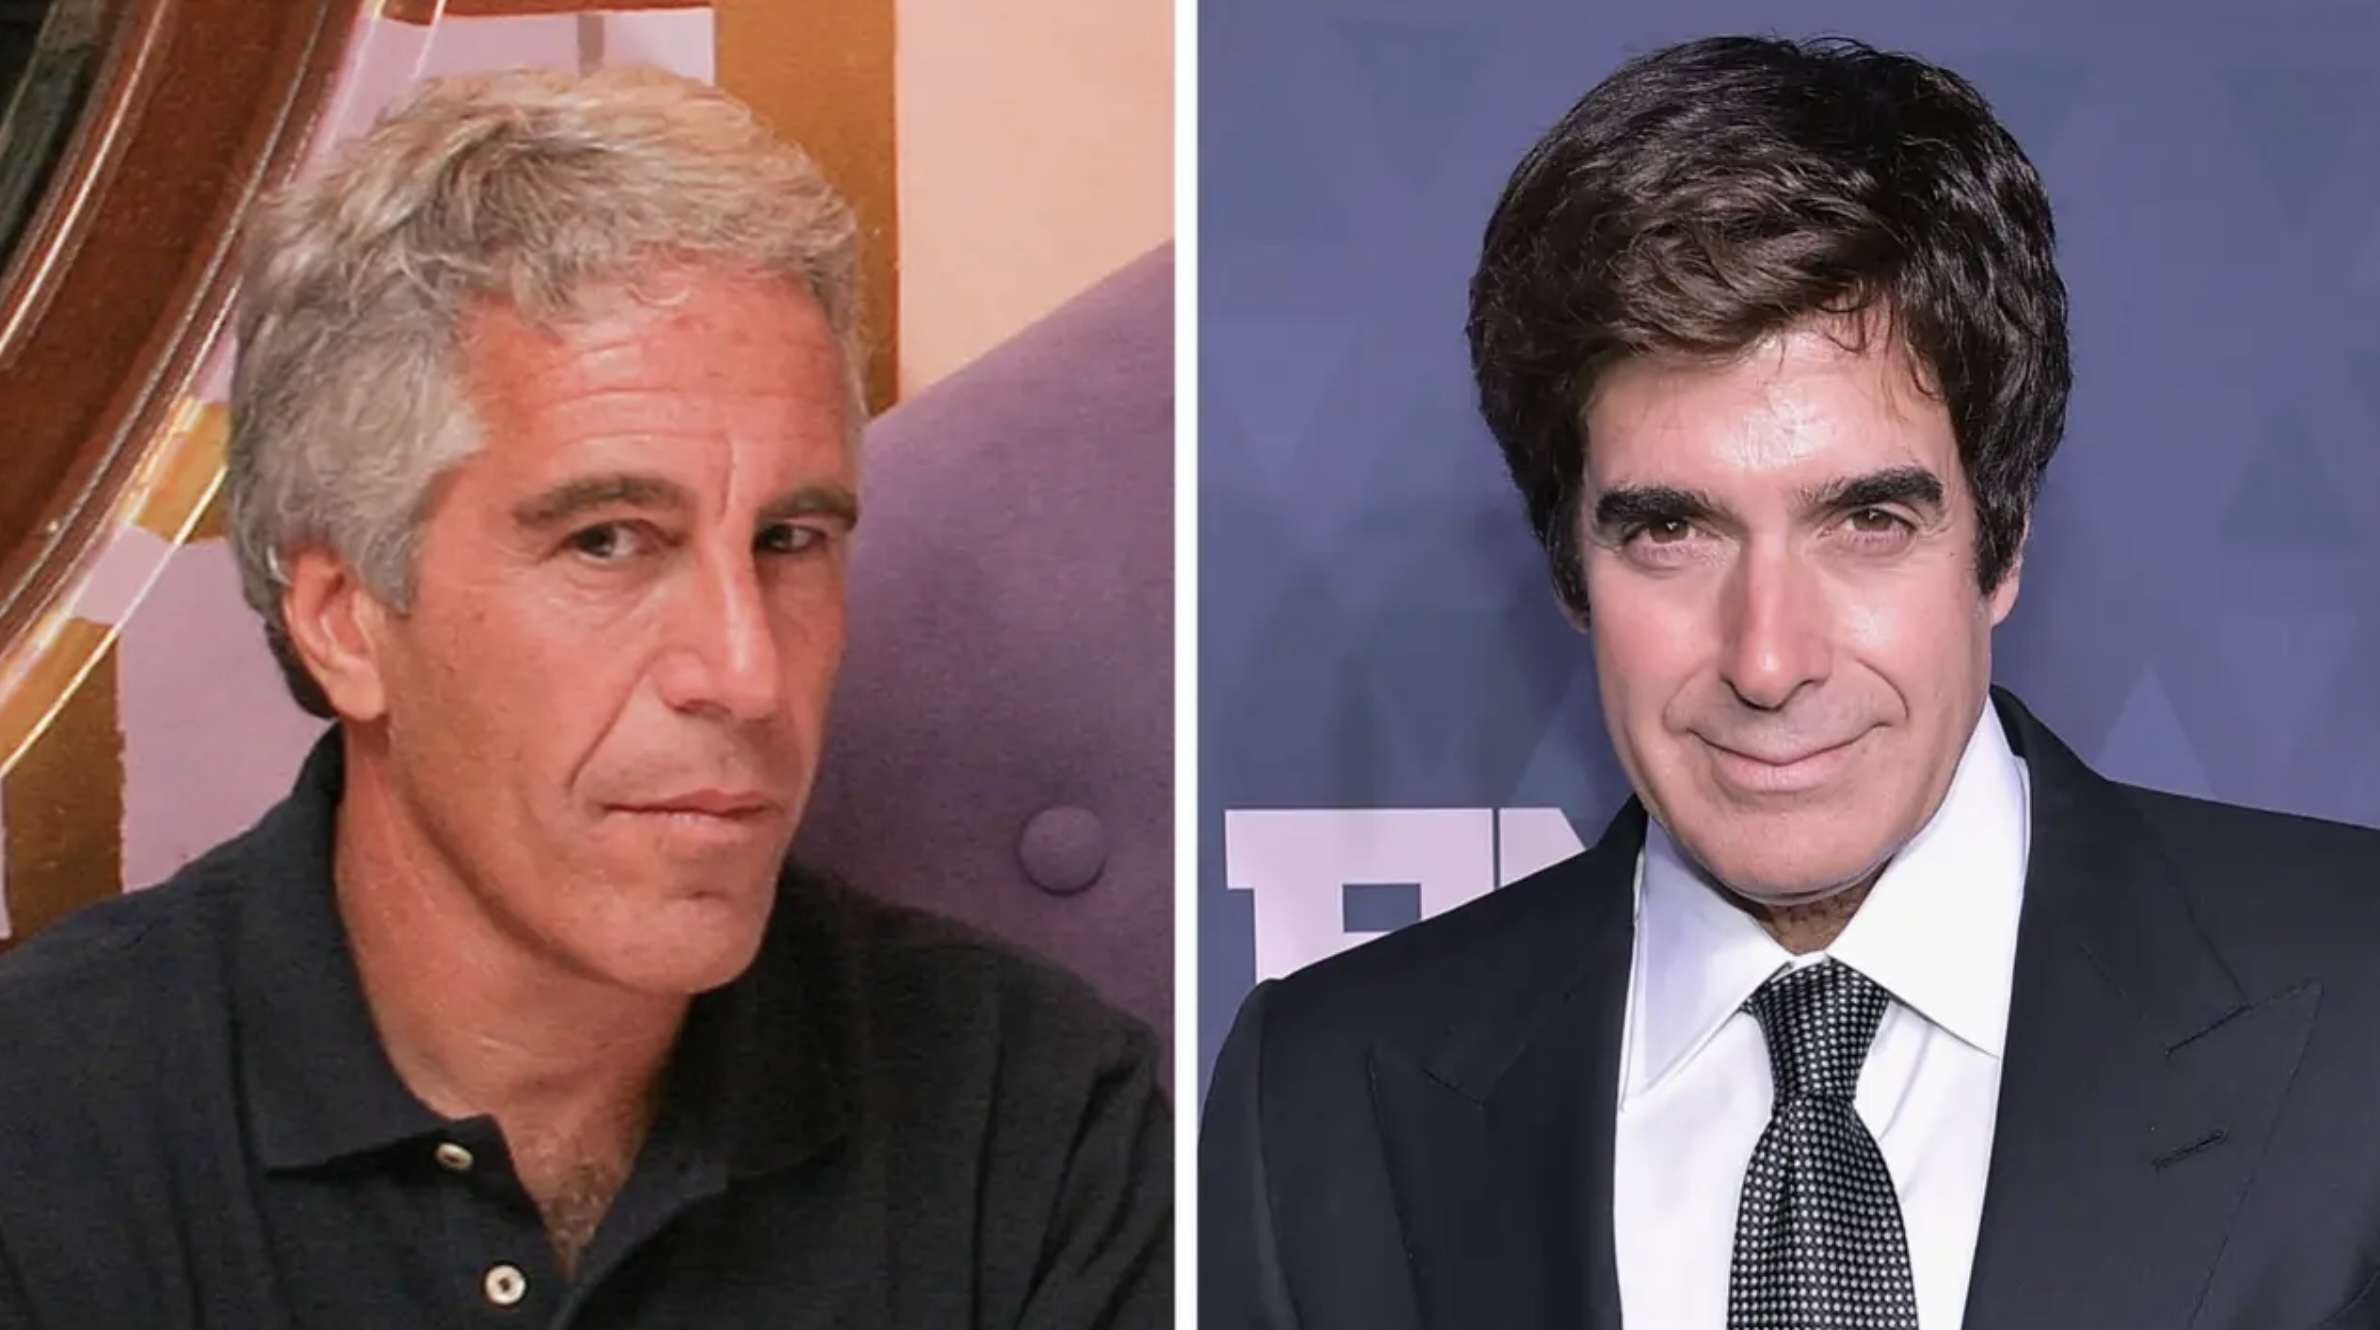 David Copperfield Linked to Jeffrey Epstein in Newly Unsealed Court Documents